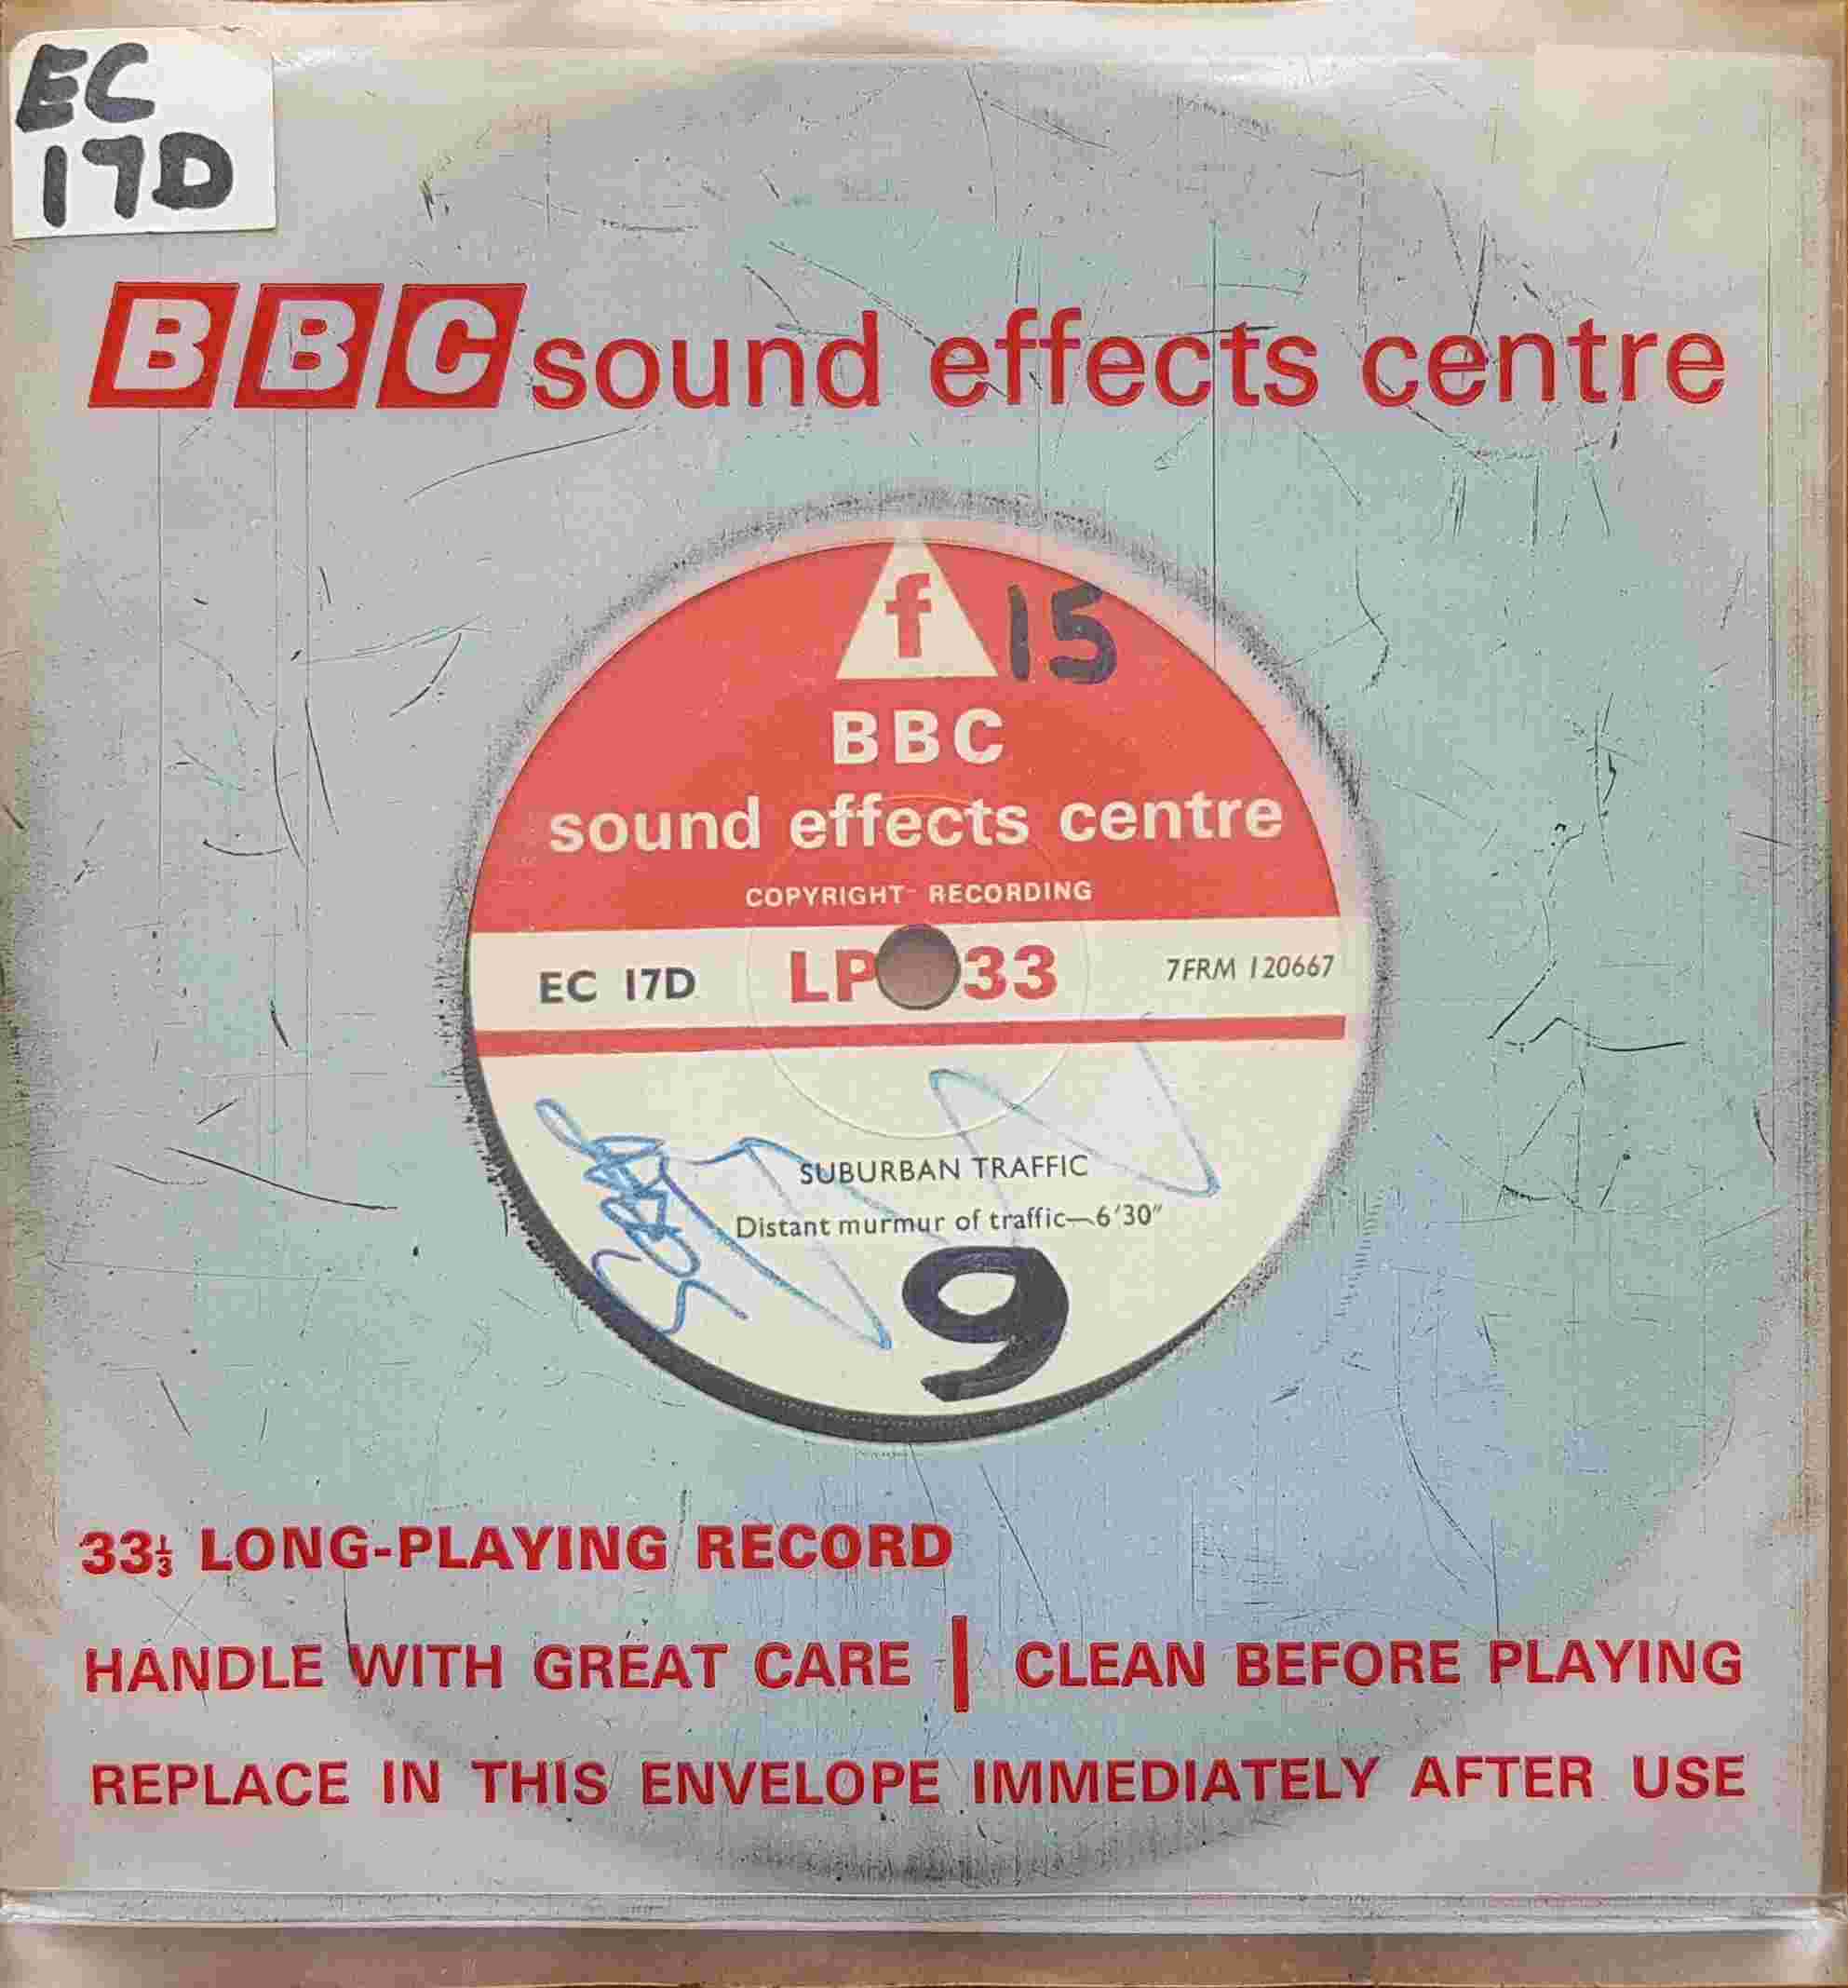 Picture of EC 17D Suburban traffic / Traffic by artist Not registered from the BBC singles - Records and Tapes library